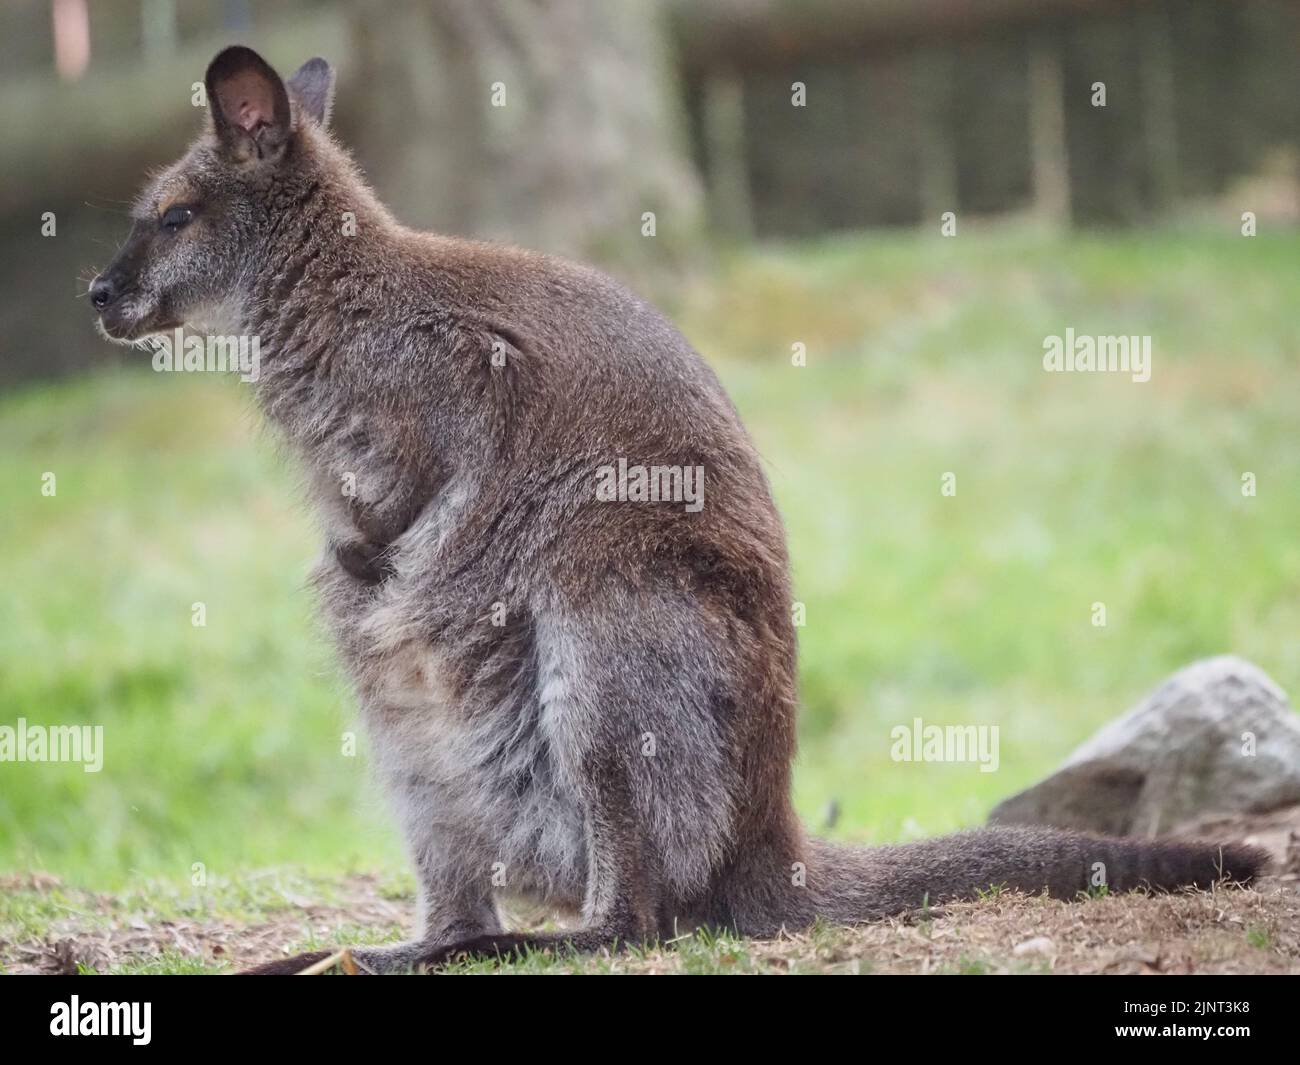 Kangaroo sits on a green lawn against the background of a wooden fence Stock Photo